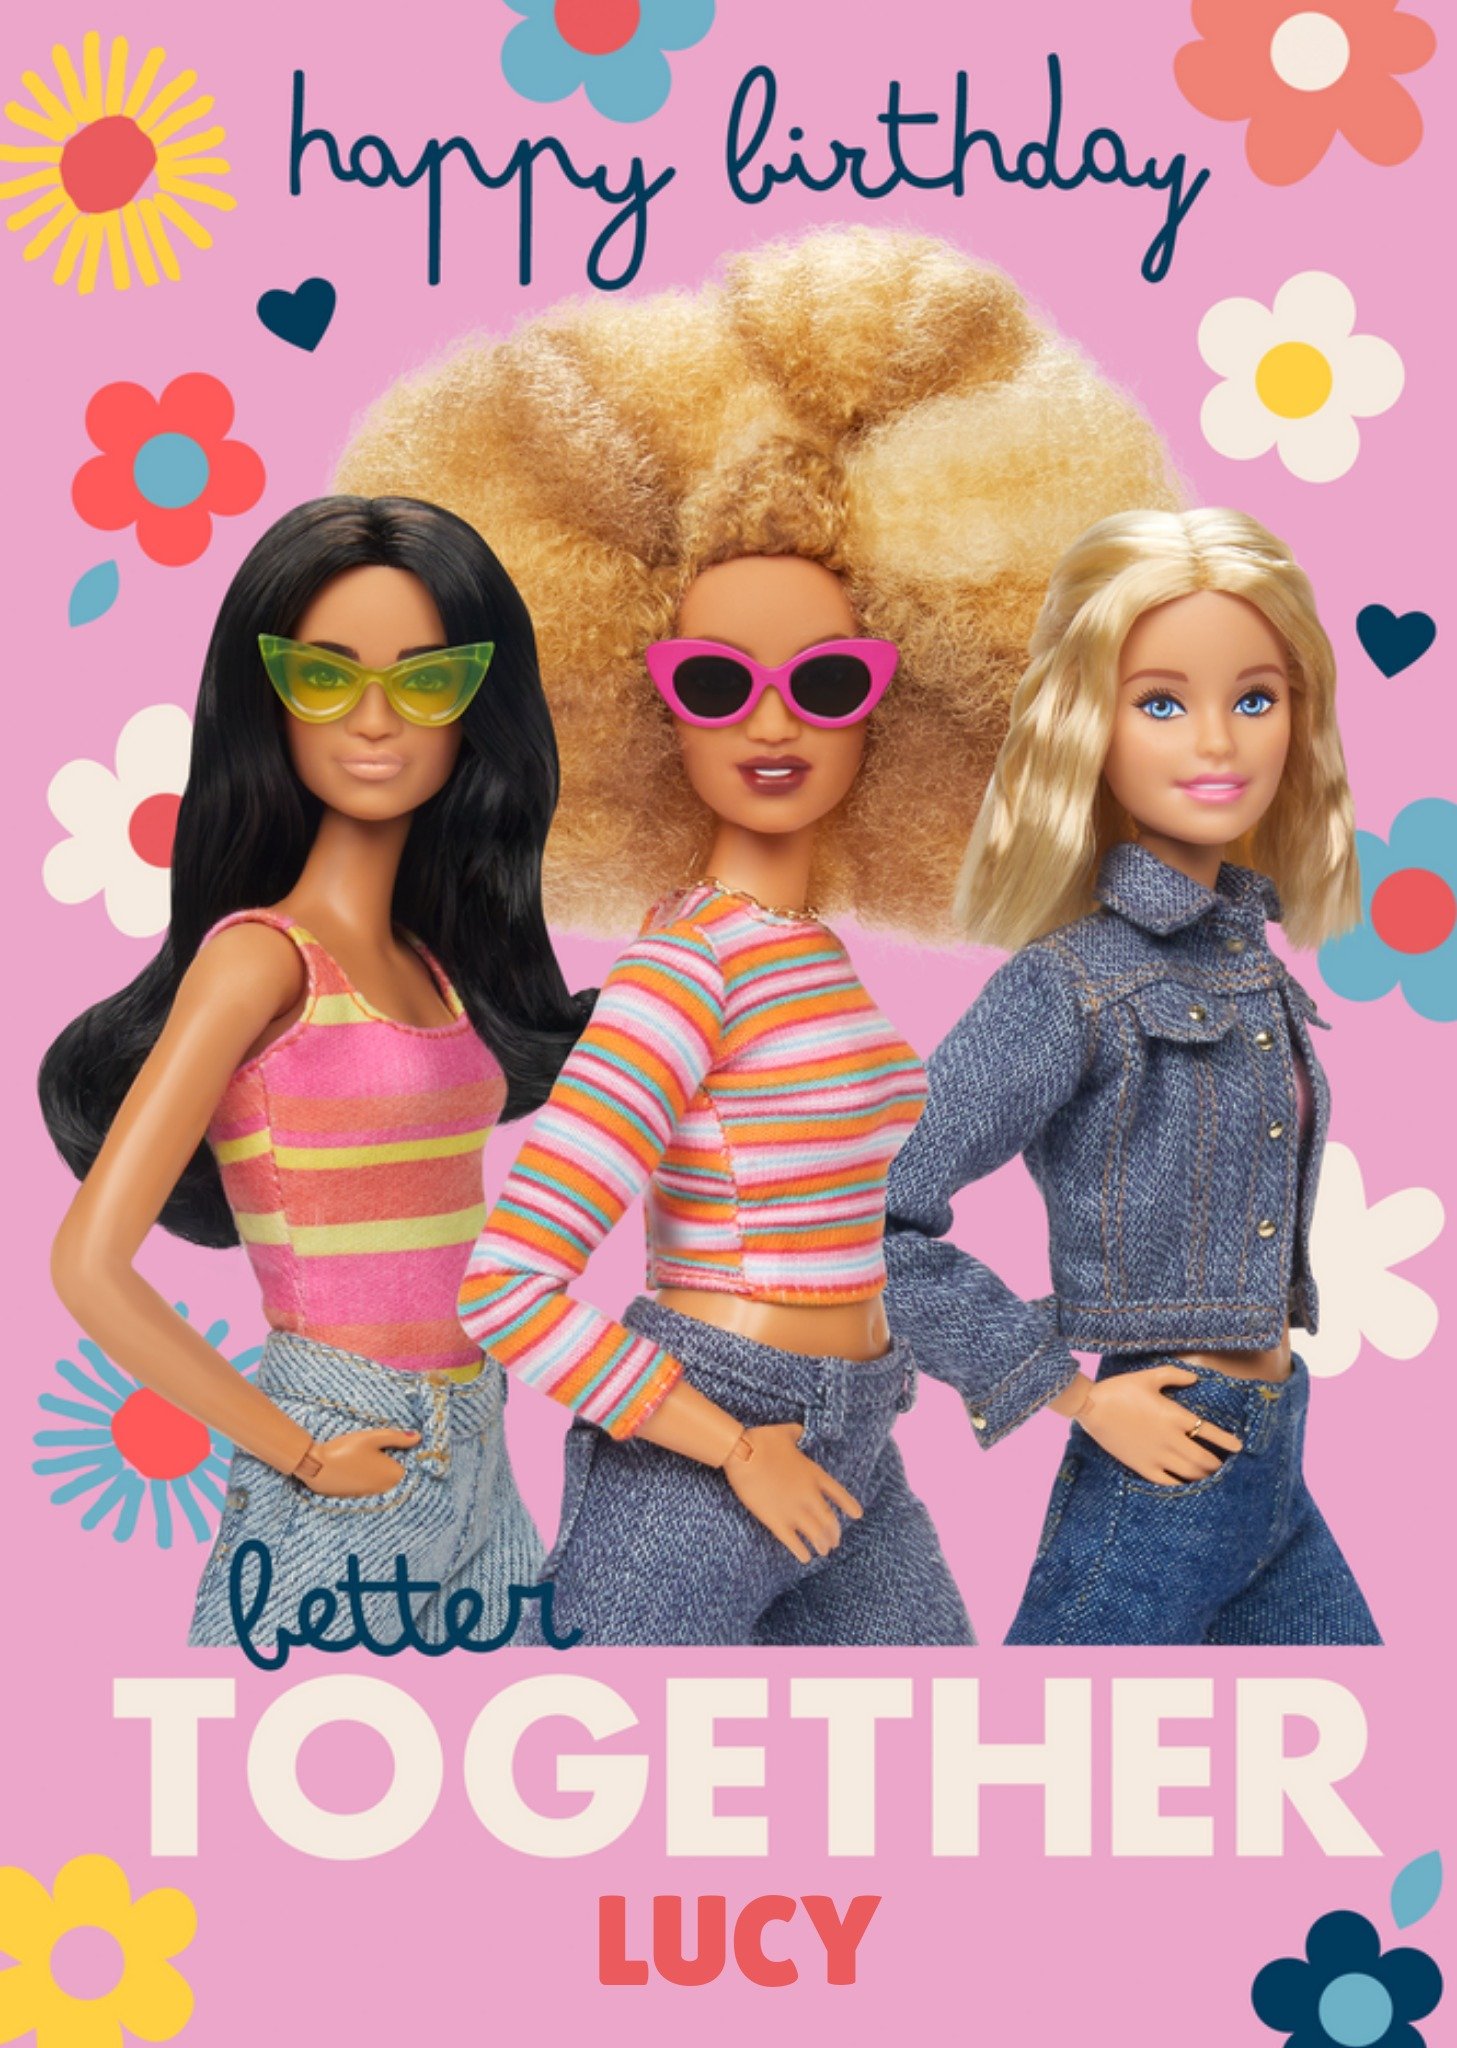 Barbie Doll And Friends Better Together Fun Bright Birthday Card, Large